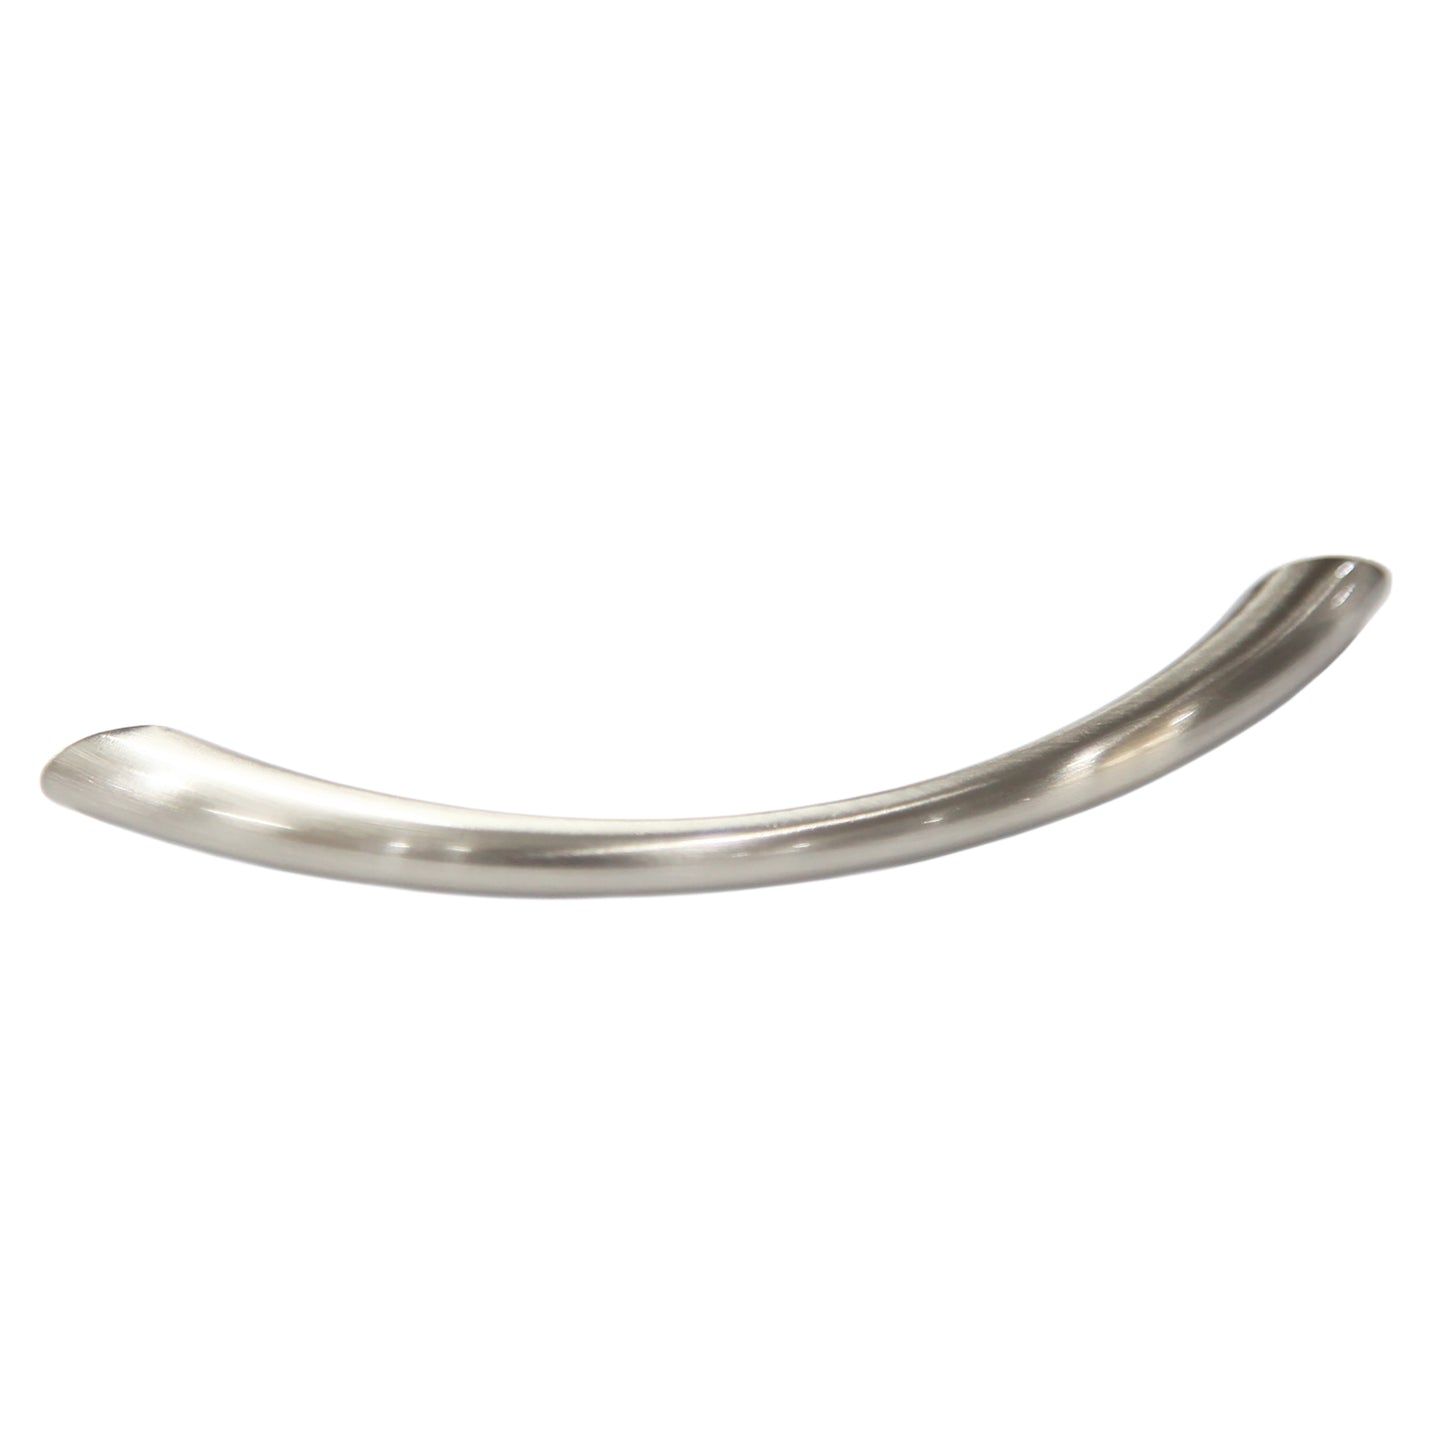 Smooth 3-3/4 in. (96mm) Satin Nickel Drawer Pull (10-Pack)